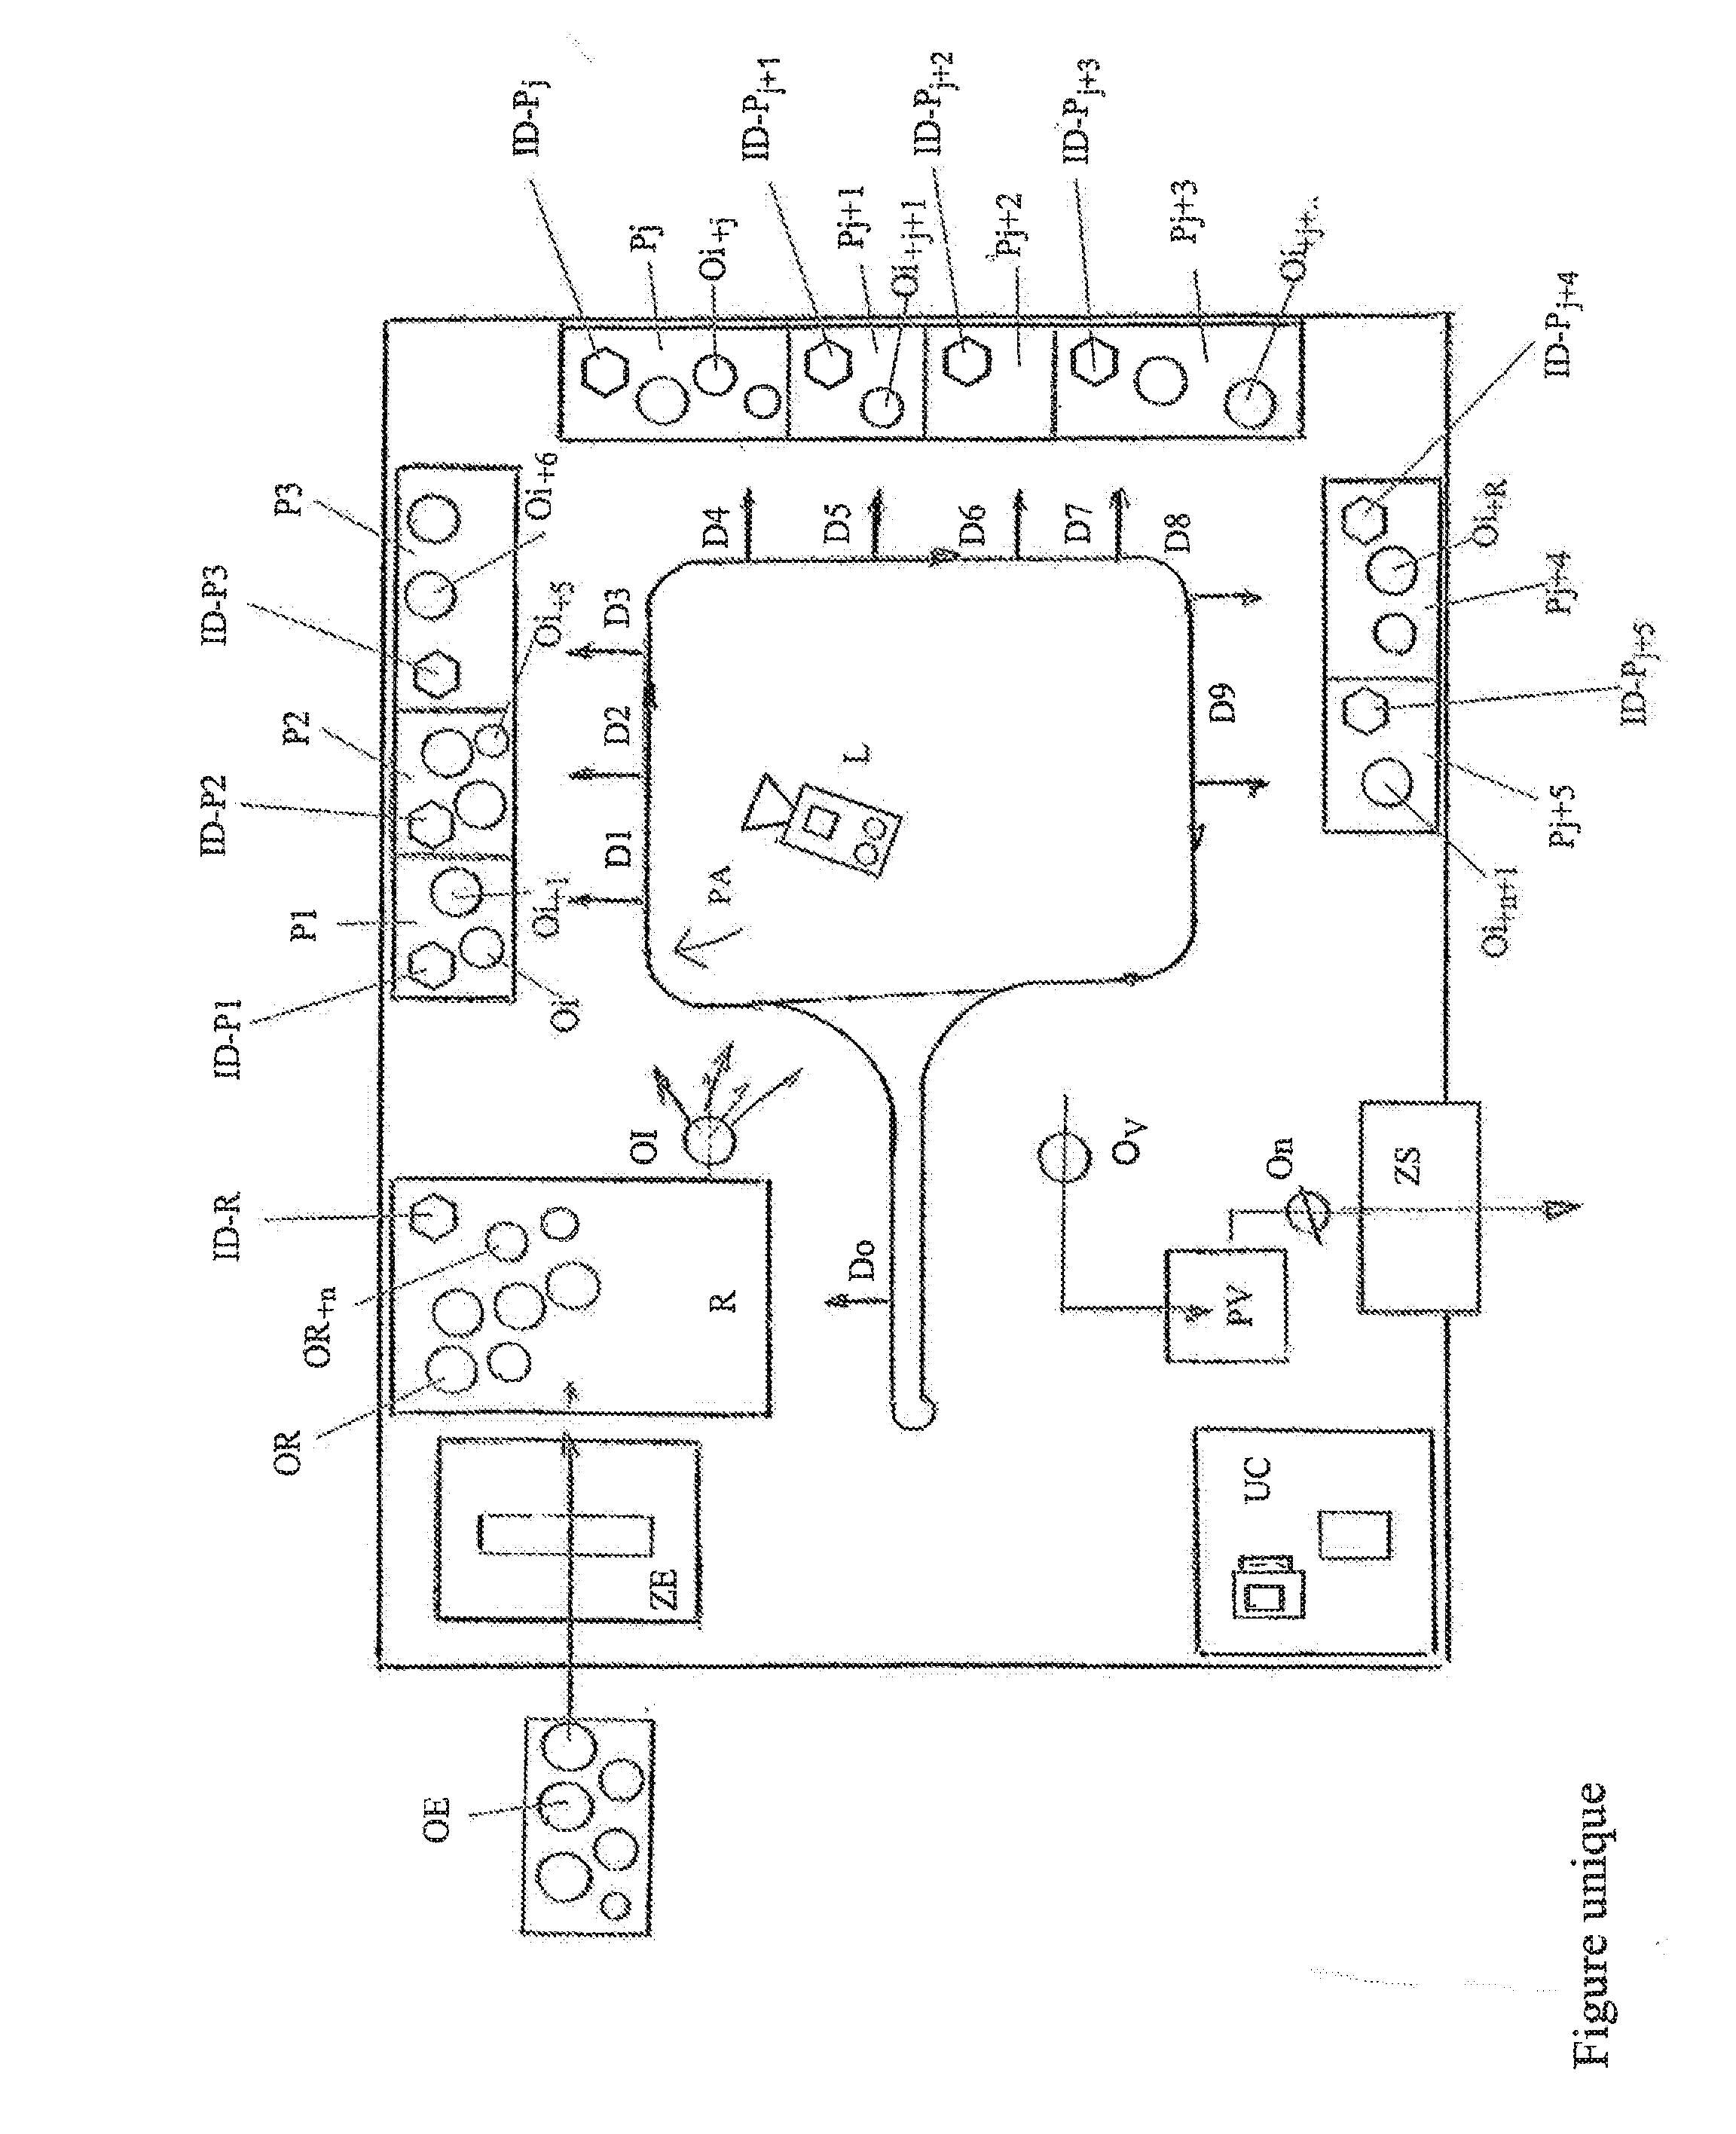 System for managing a collection of objects such as the stock of clothes and accessories of a clothing store